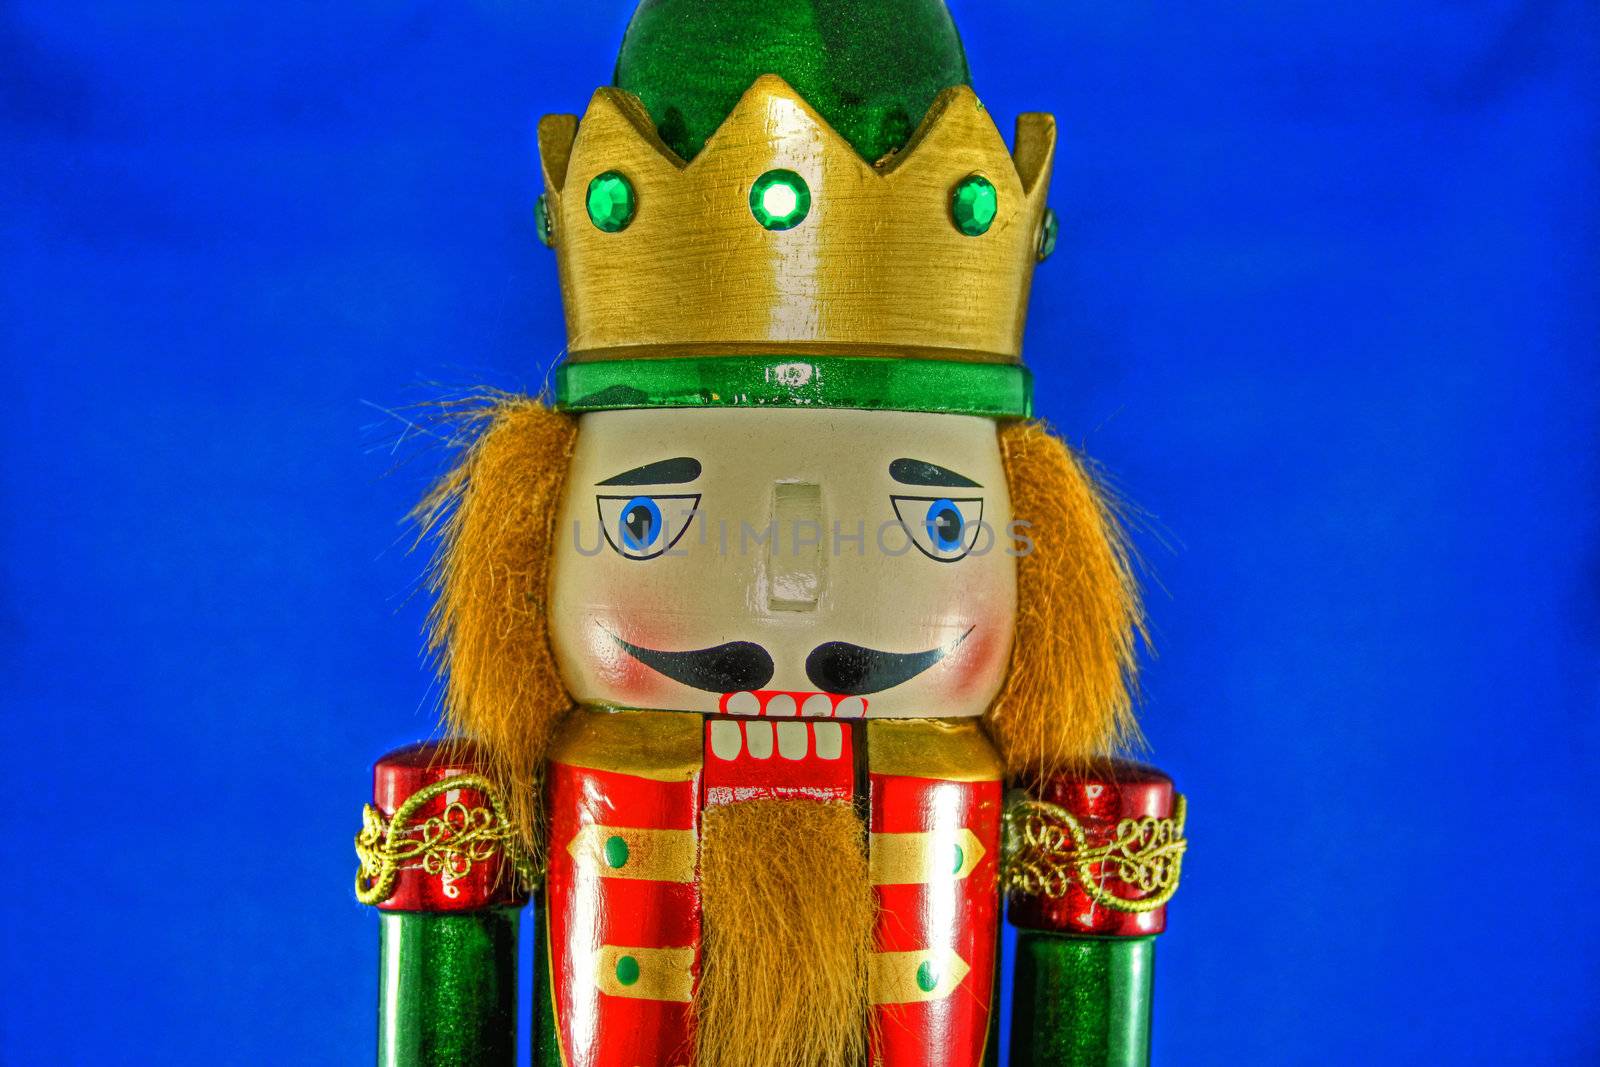 Close up view of Nutcracker on blue background